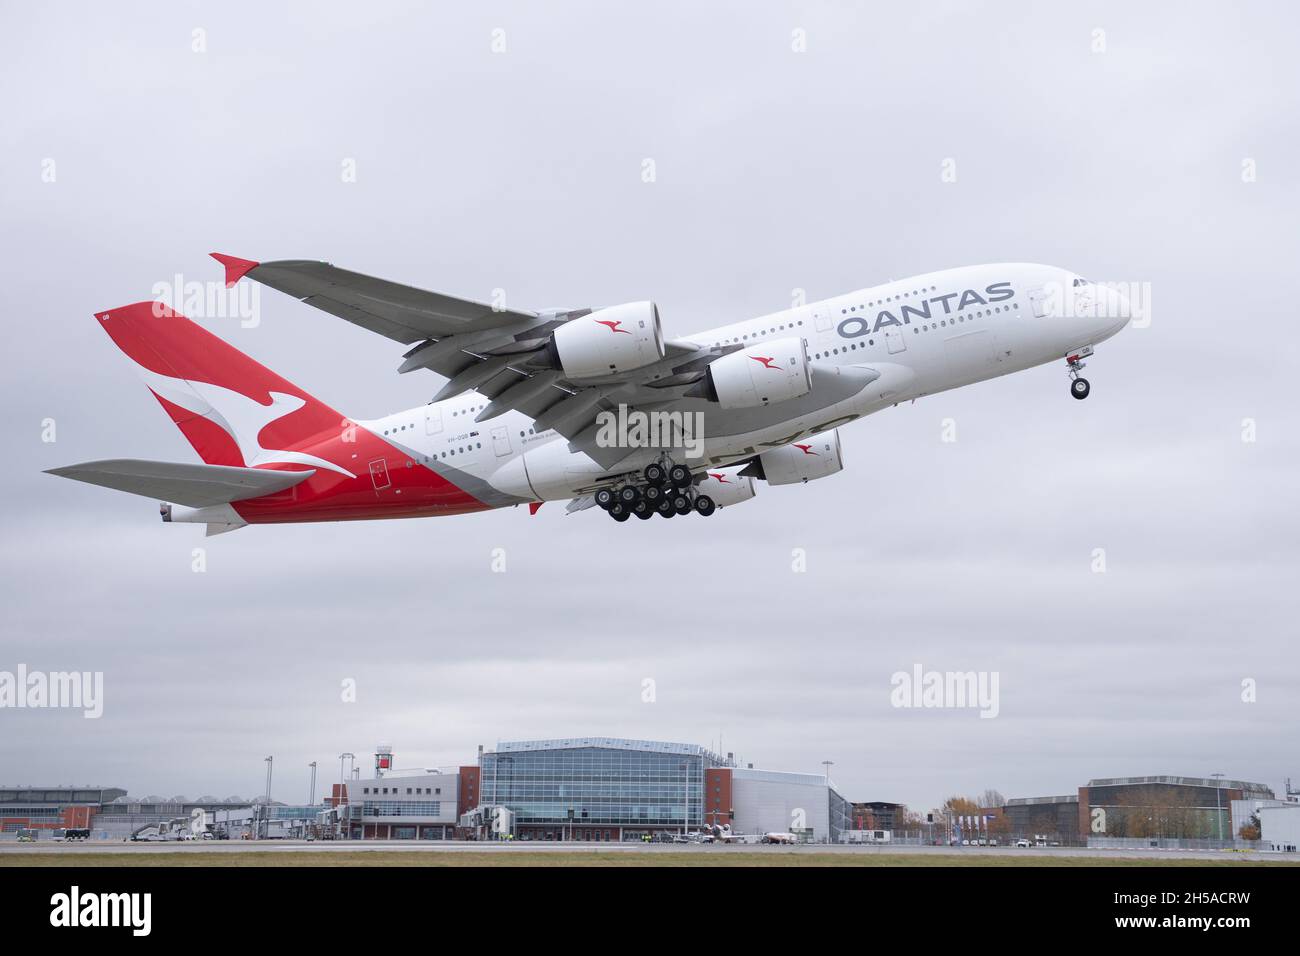 Dresden, Germany. 08th Nov, 2021. A Qantas Airways Airbus A380 takes off from Dresden Airport. The aircraft will make the long-haul flight to Sydney following maintenance work at Elbe Flugzeugwerke (EFW). Credit: Sebastian Kahnert/dpa-Zentralbild/dpa/Alamy Live News Stock Photo